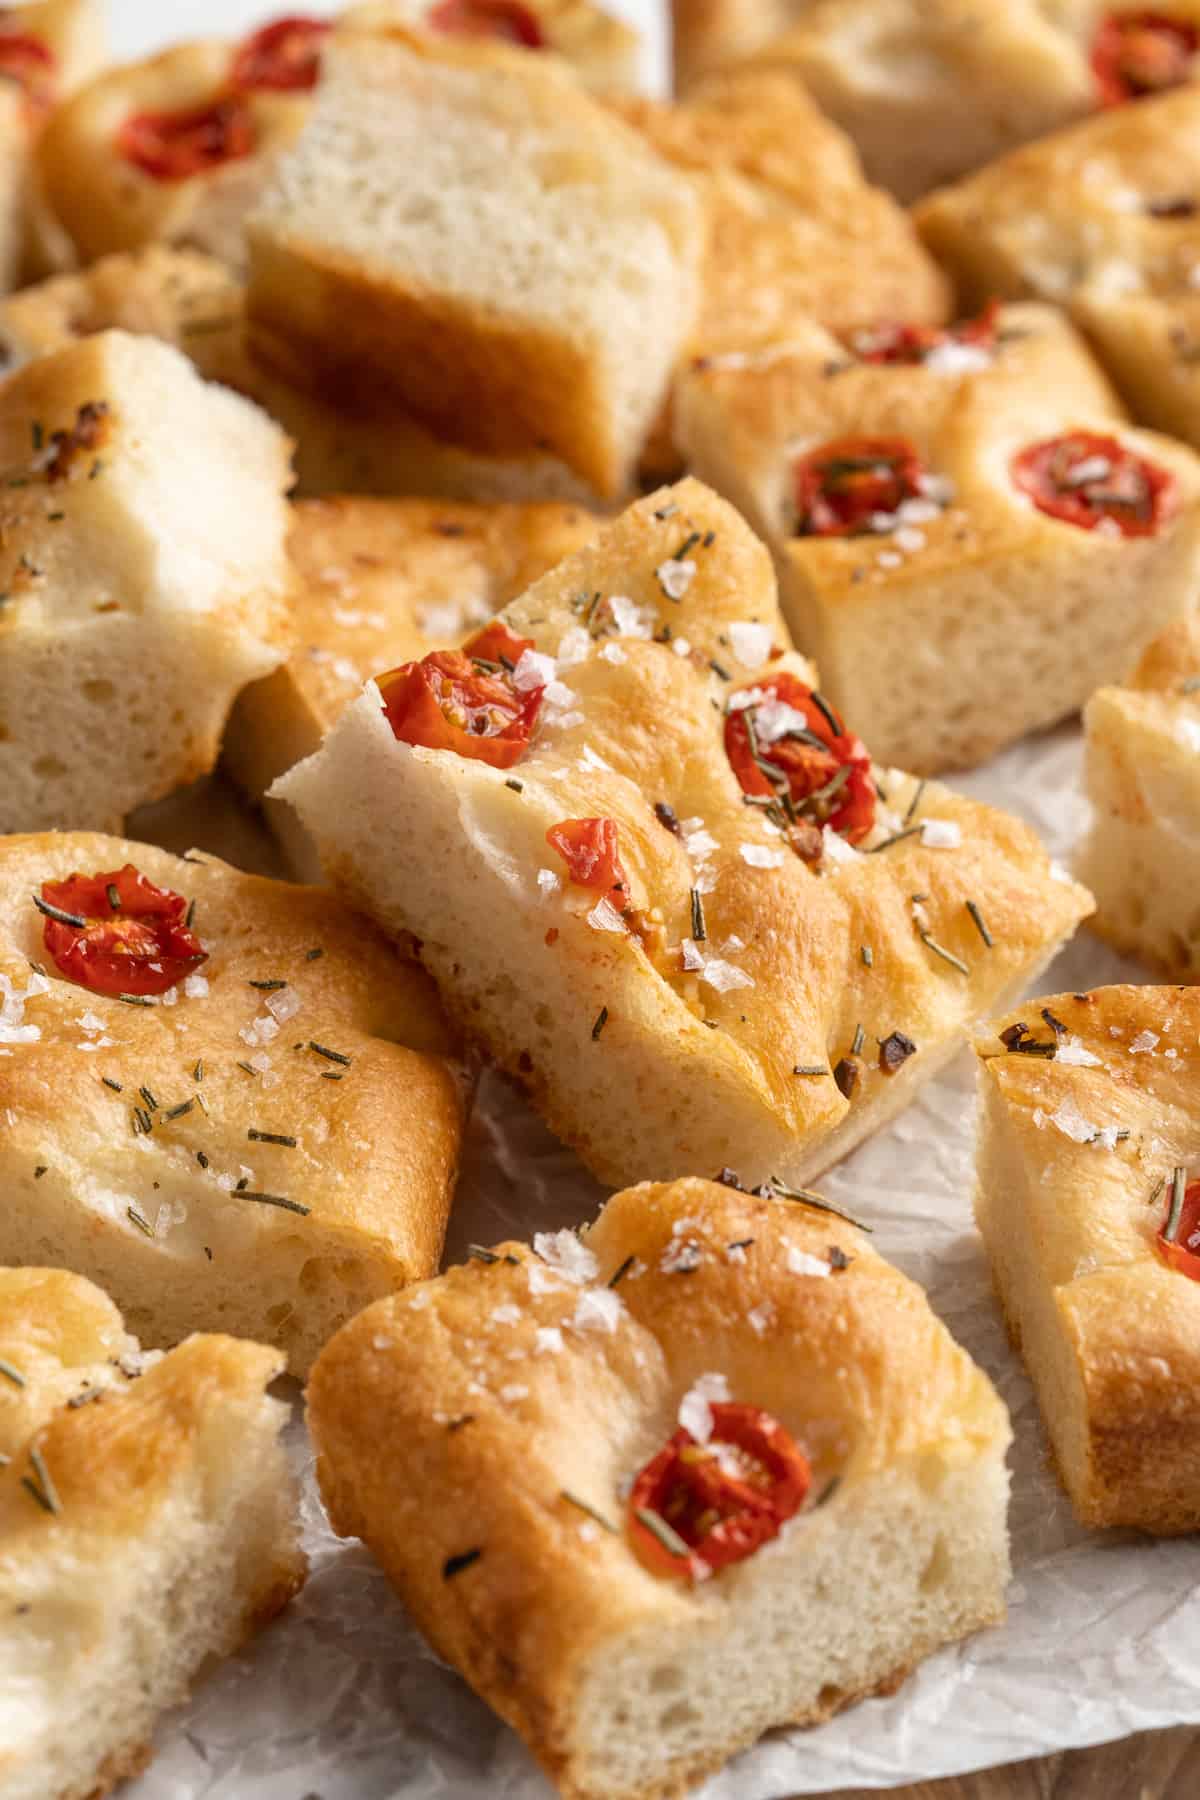 Pile of gluten-free focaccia on parchment paper